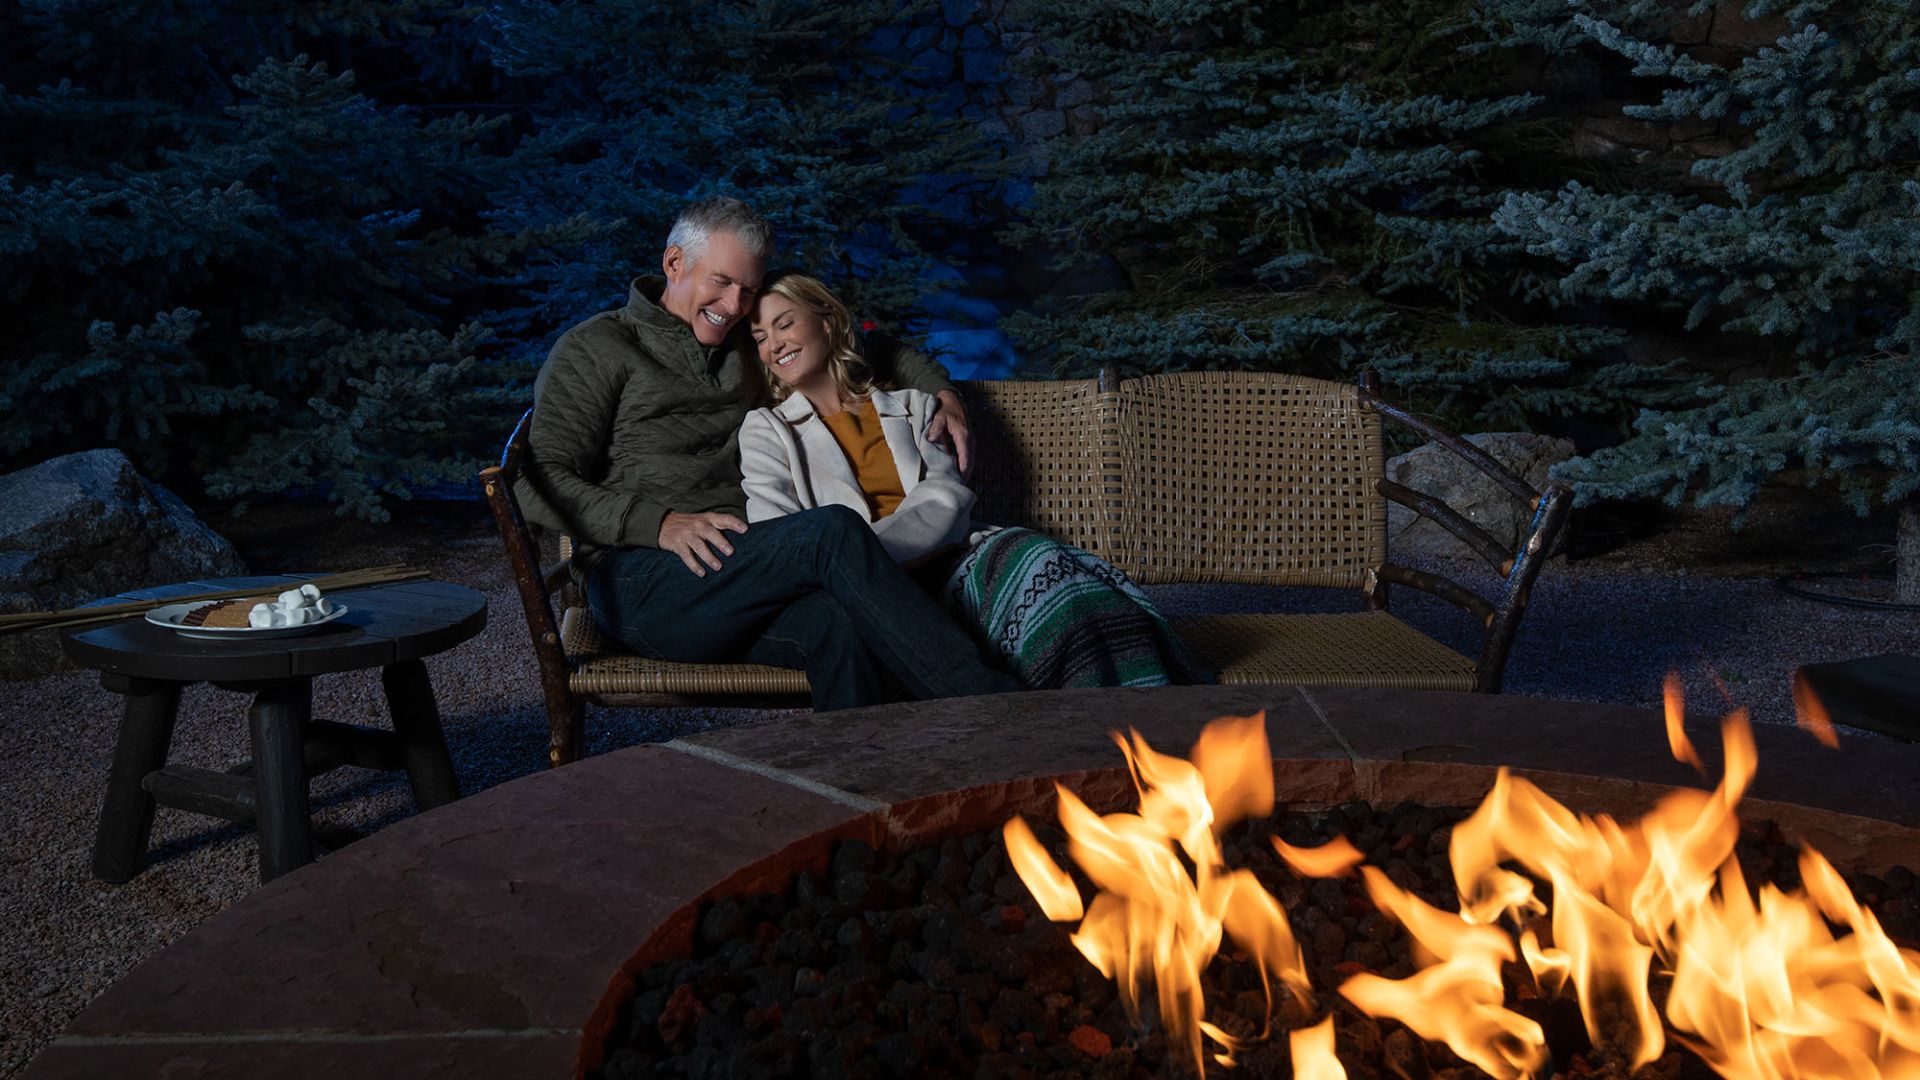 A Man And Woman Sitting On A Couch In Front Of A Fire